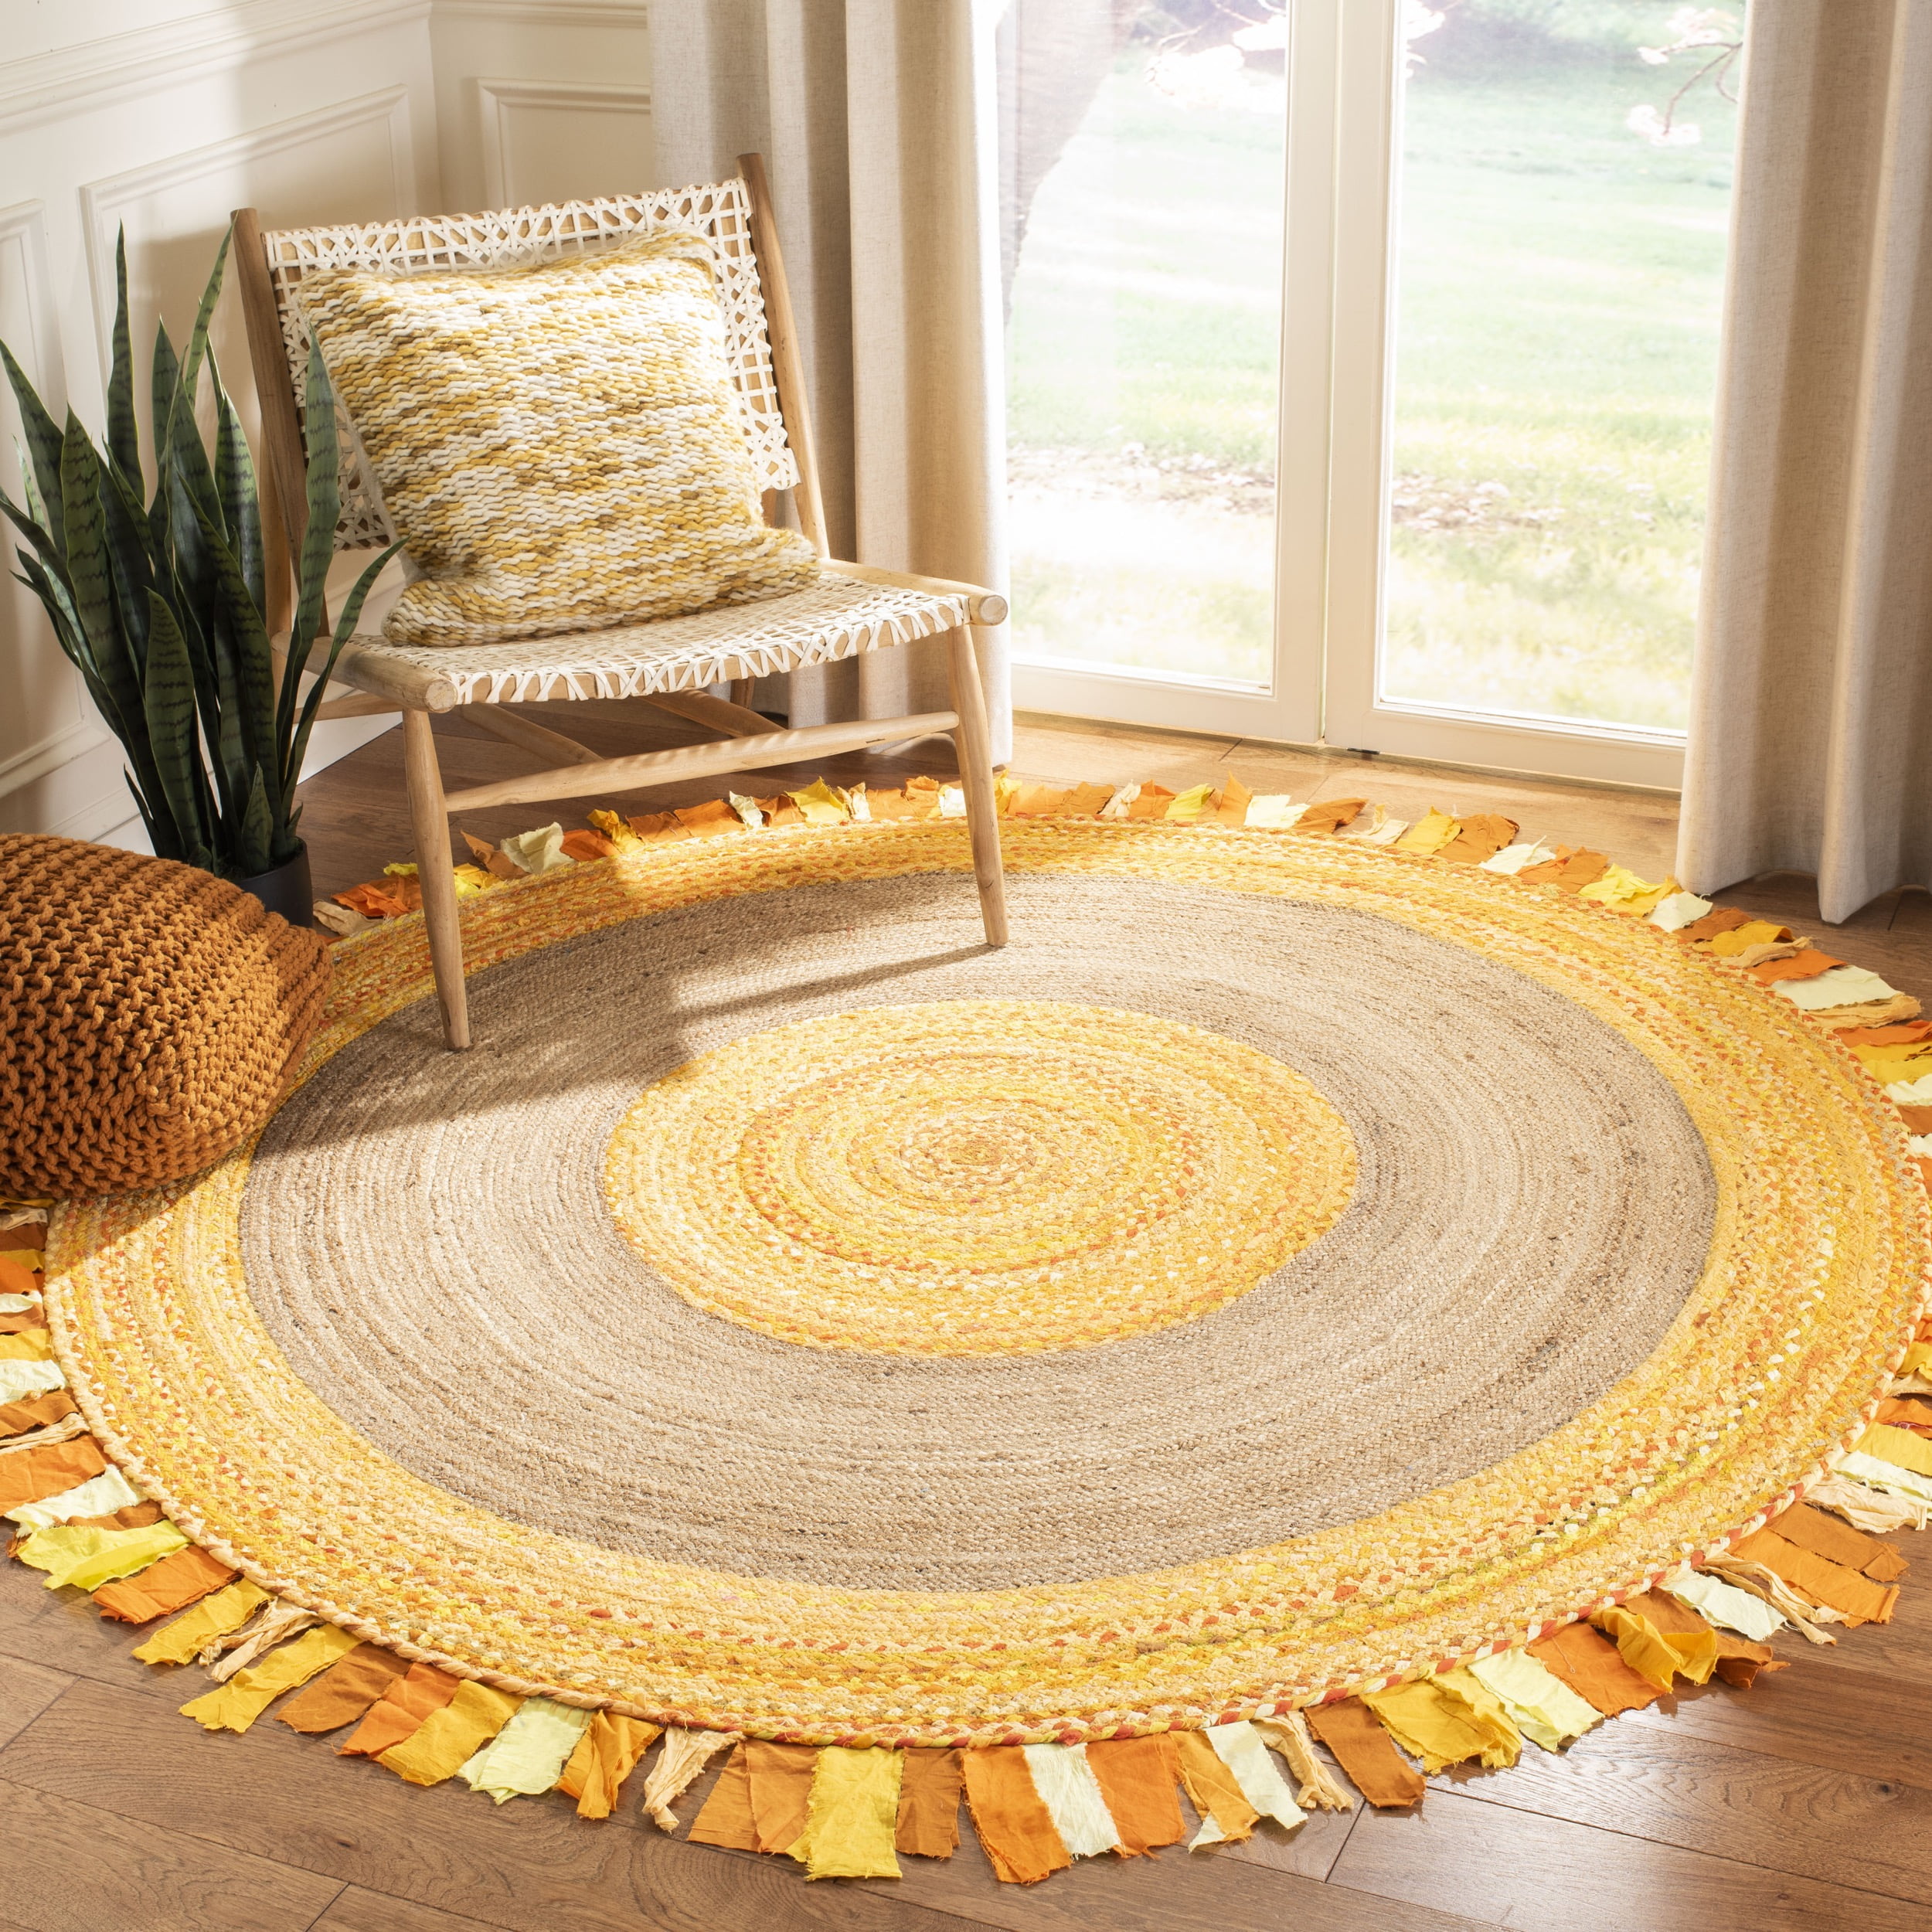 SAFAVIEH Cape Cod Susan Braided with Fringe Area Rug, 6' x 6' Round,  Gold/Natural 